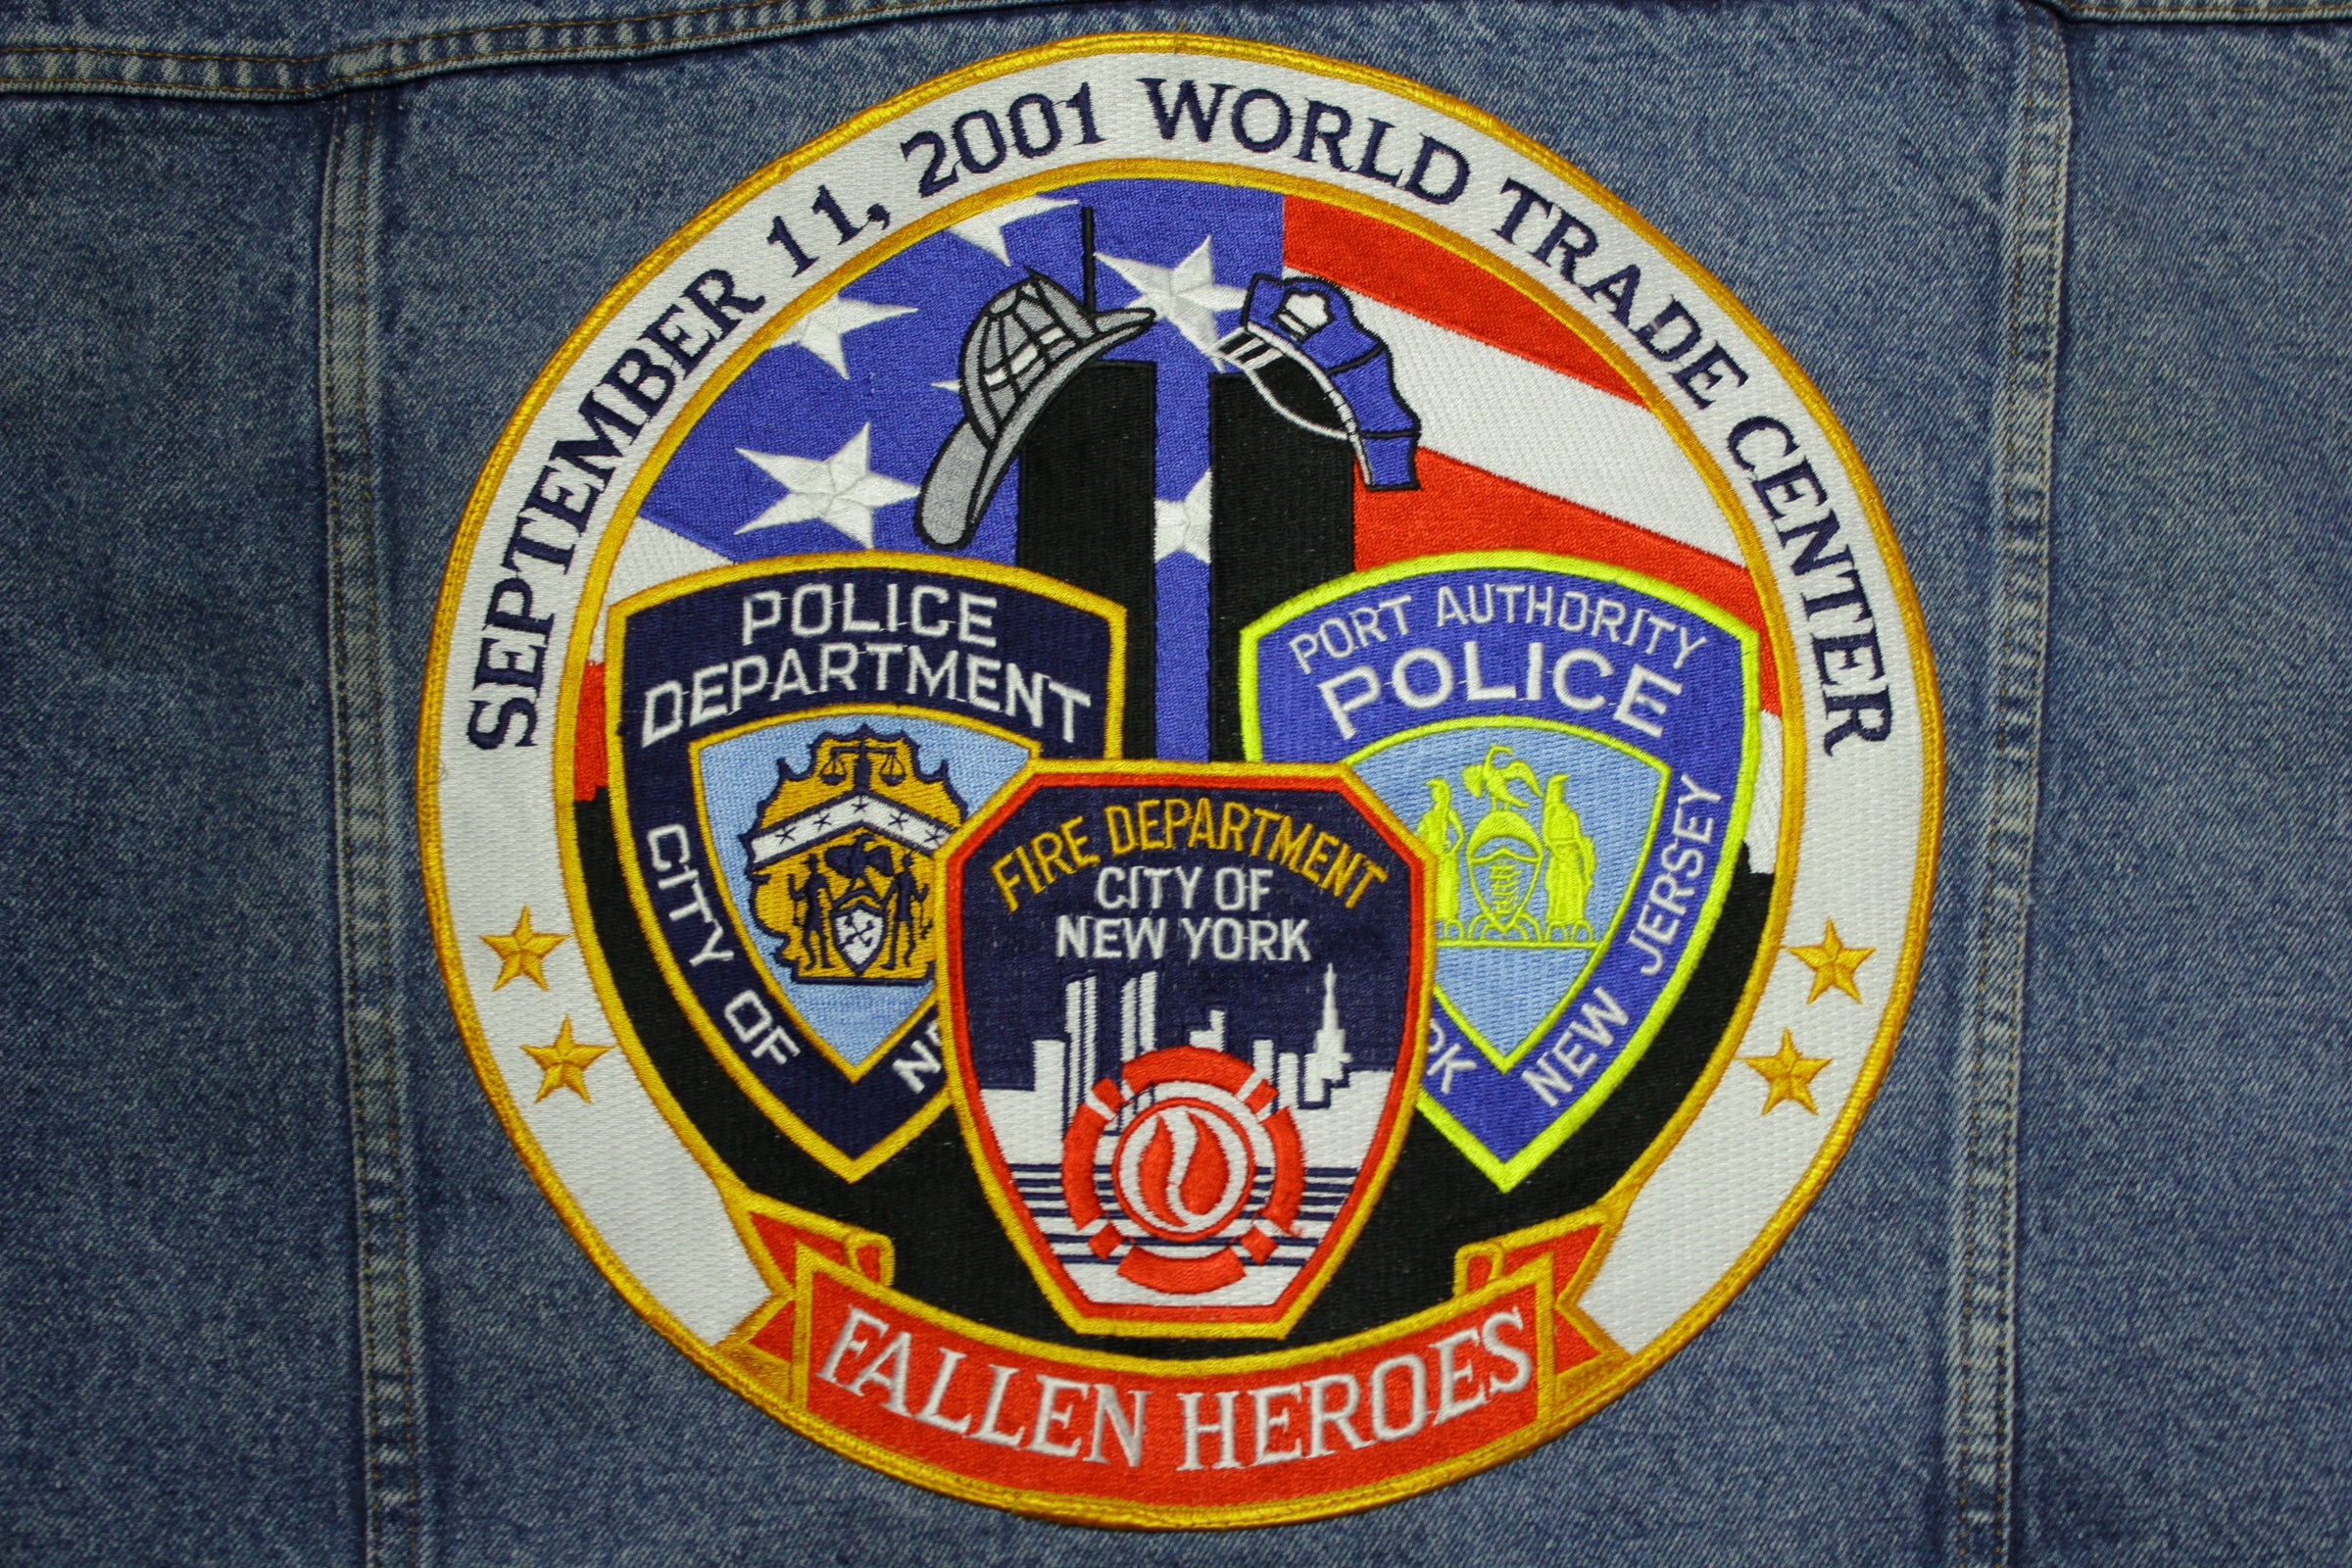 SHERIFF Back Patch POLICE EMERGENCY 911 9/11 DEA SFPD LEO PAPD NYPD SWAT  NYSO